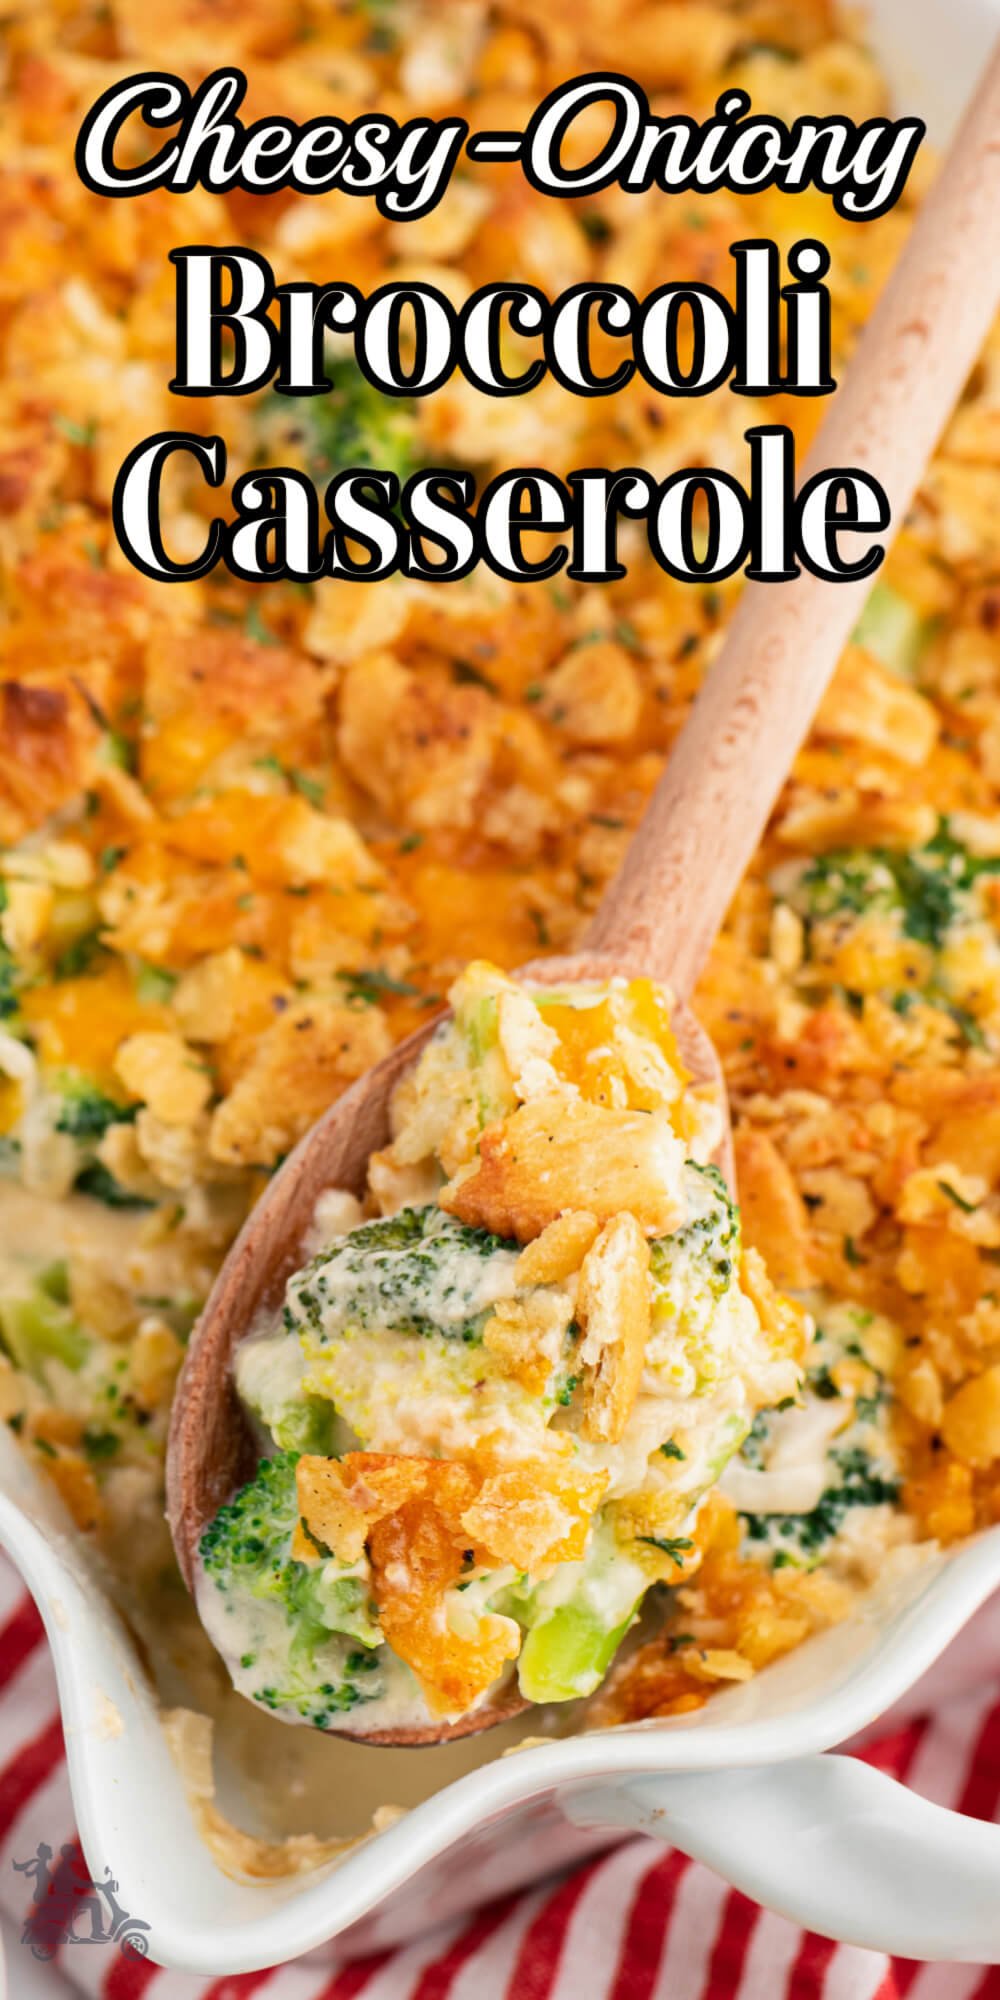 This easy Cheesy Broccoli Casserole recipe makes this popular vegetable extra special. Even the veggie haters clean up their plate when presented with broccoli that is covered in a delicious cheese-onion sauce that's topped with crunchy buttery crackers. It's so easy to make, you'll want to make it often and not just a vegetable side for holidays.